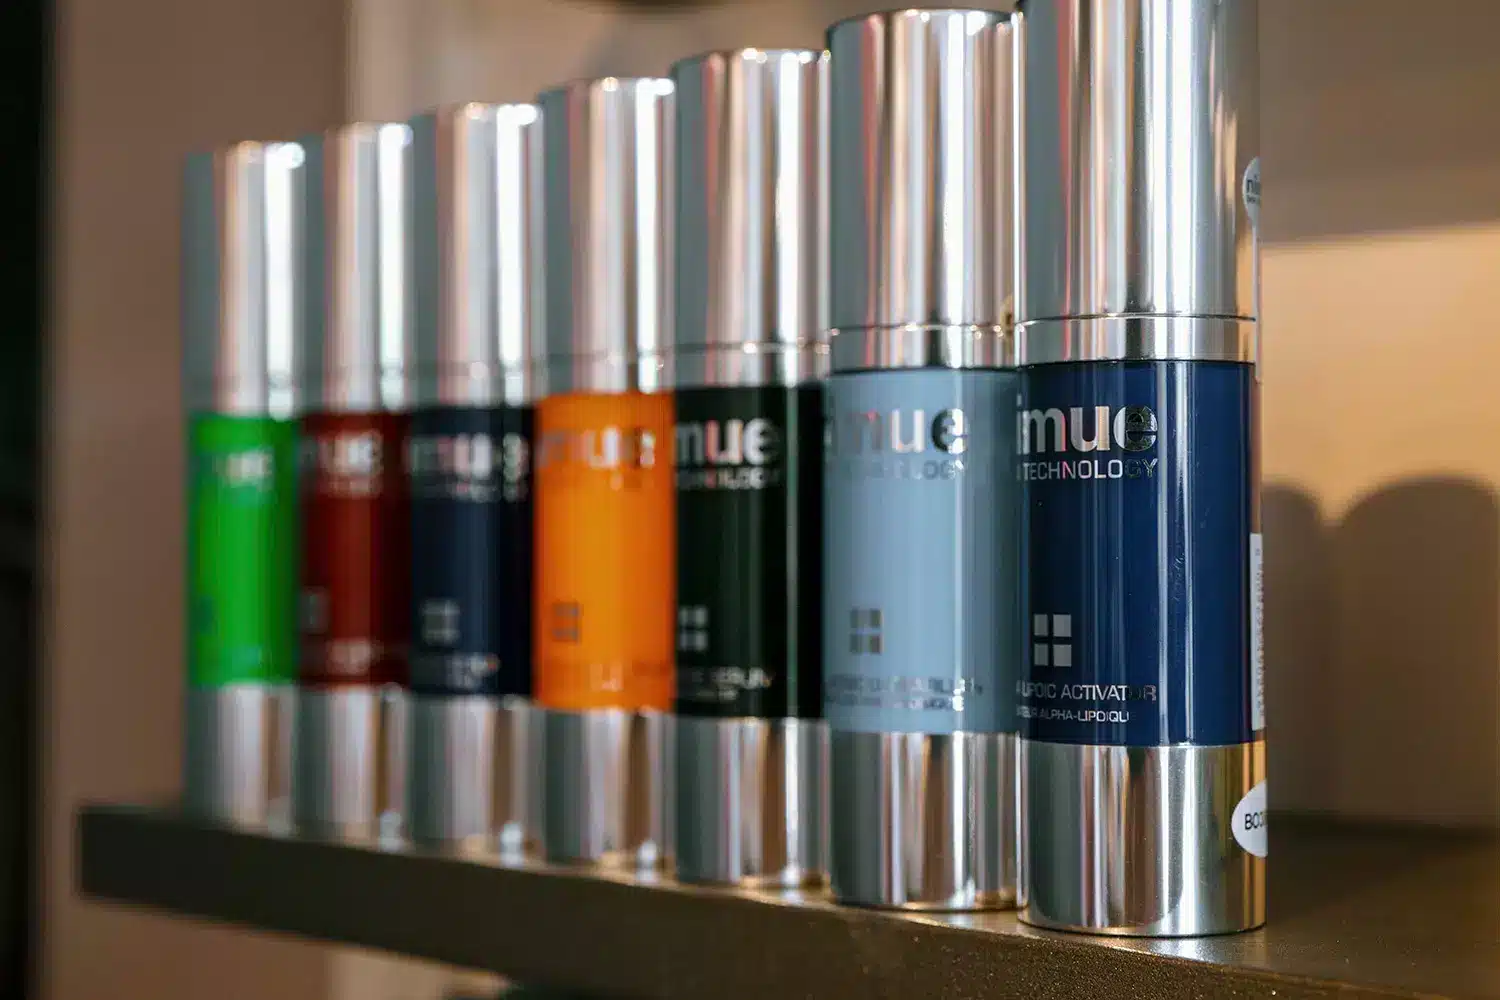 Nimue Brand Page